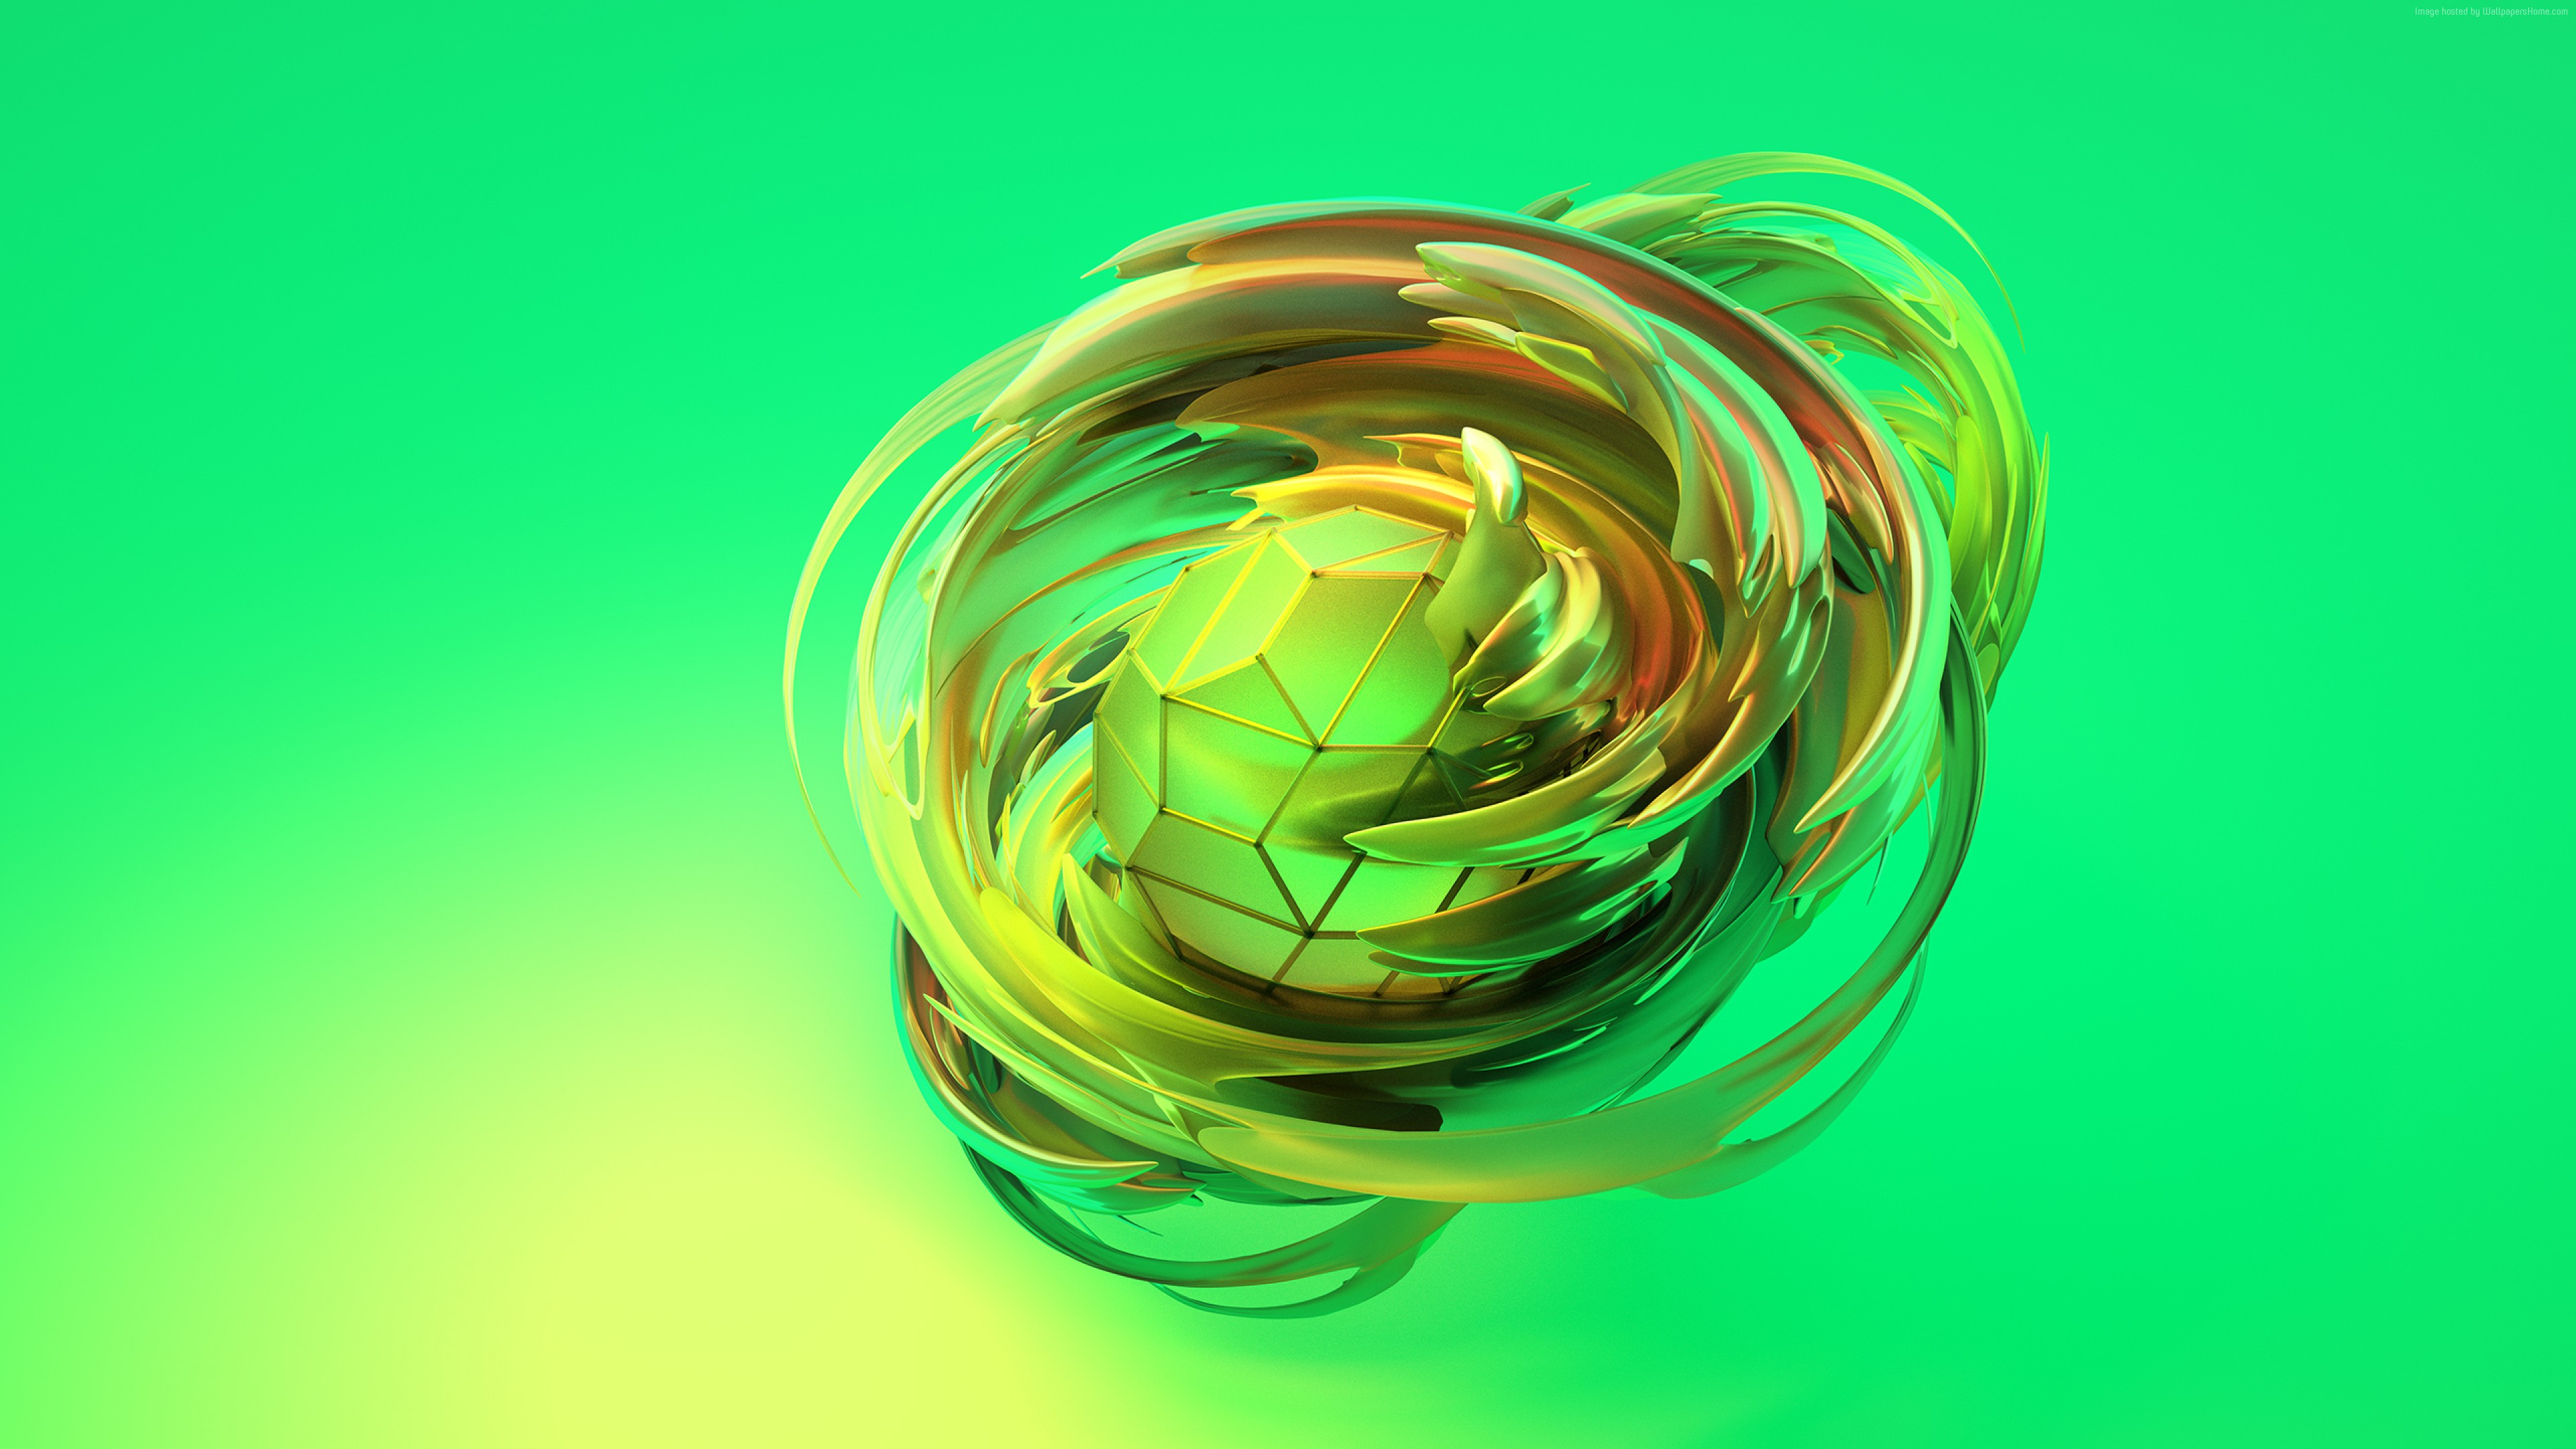 Abstract Sphere Wallpapers